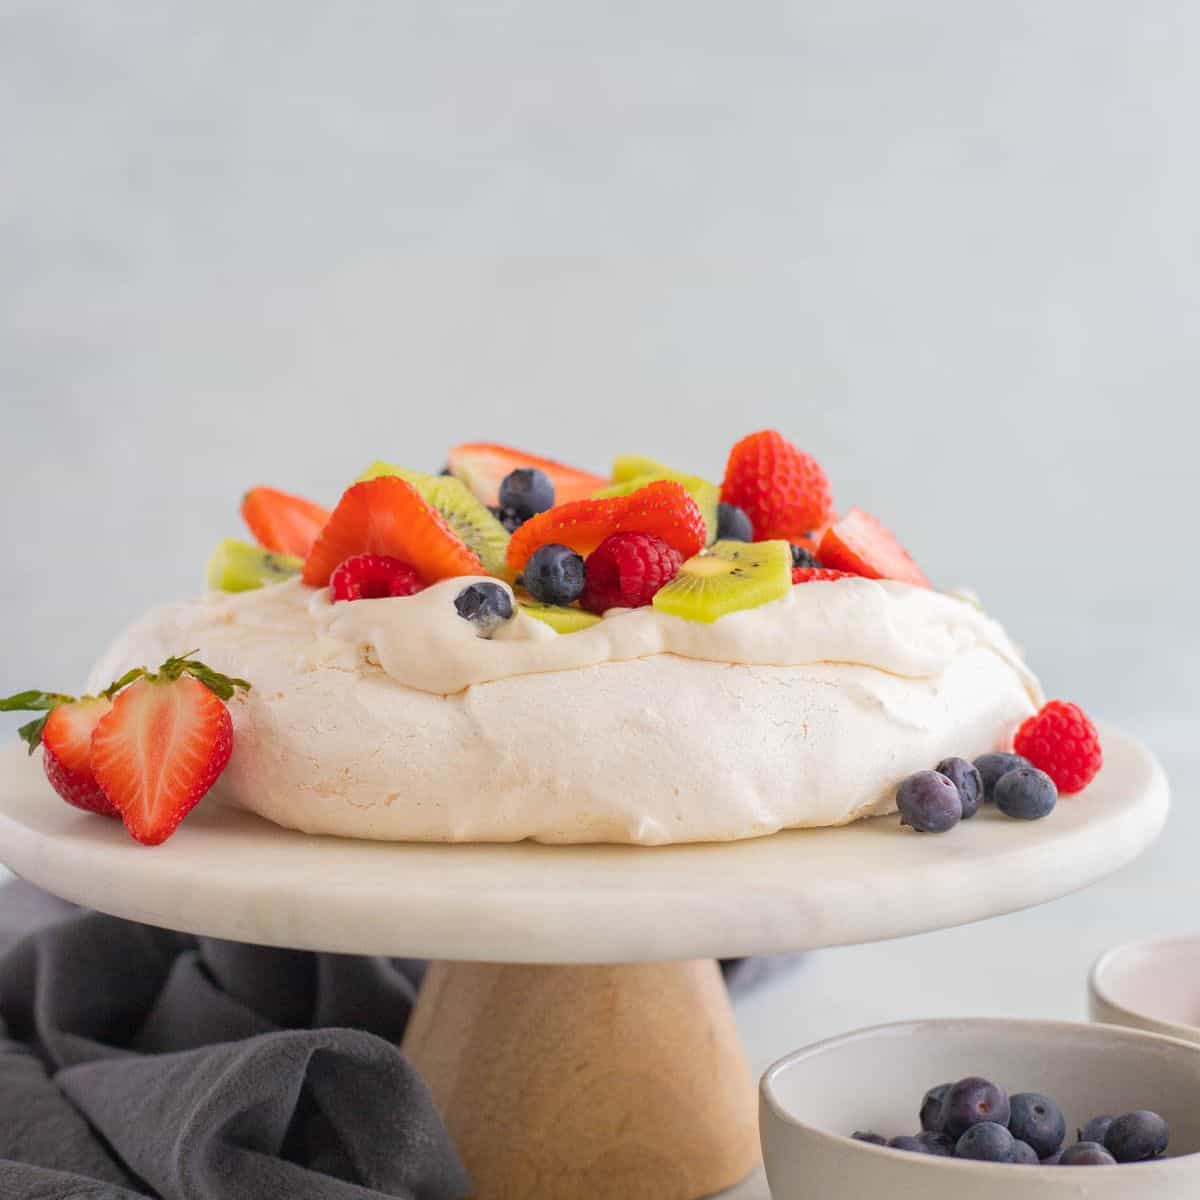 Pavlova topped with berries on a white cake stand.